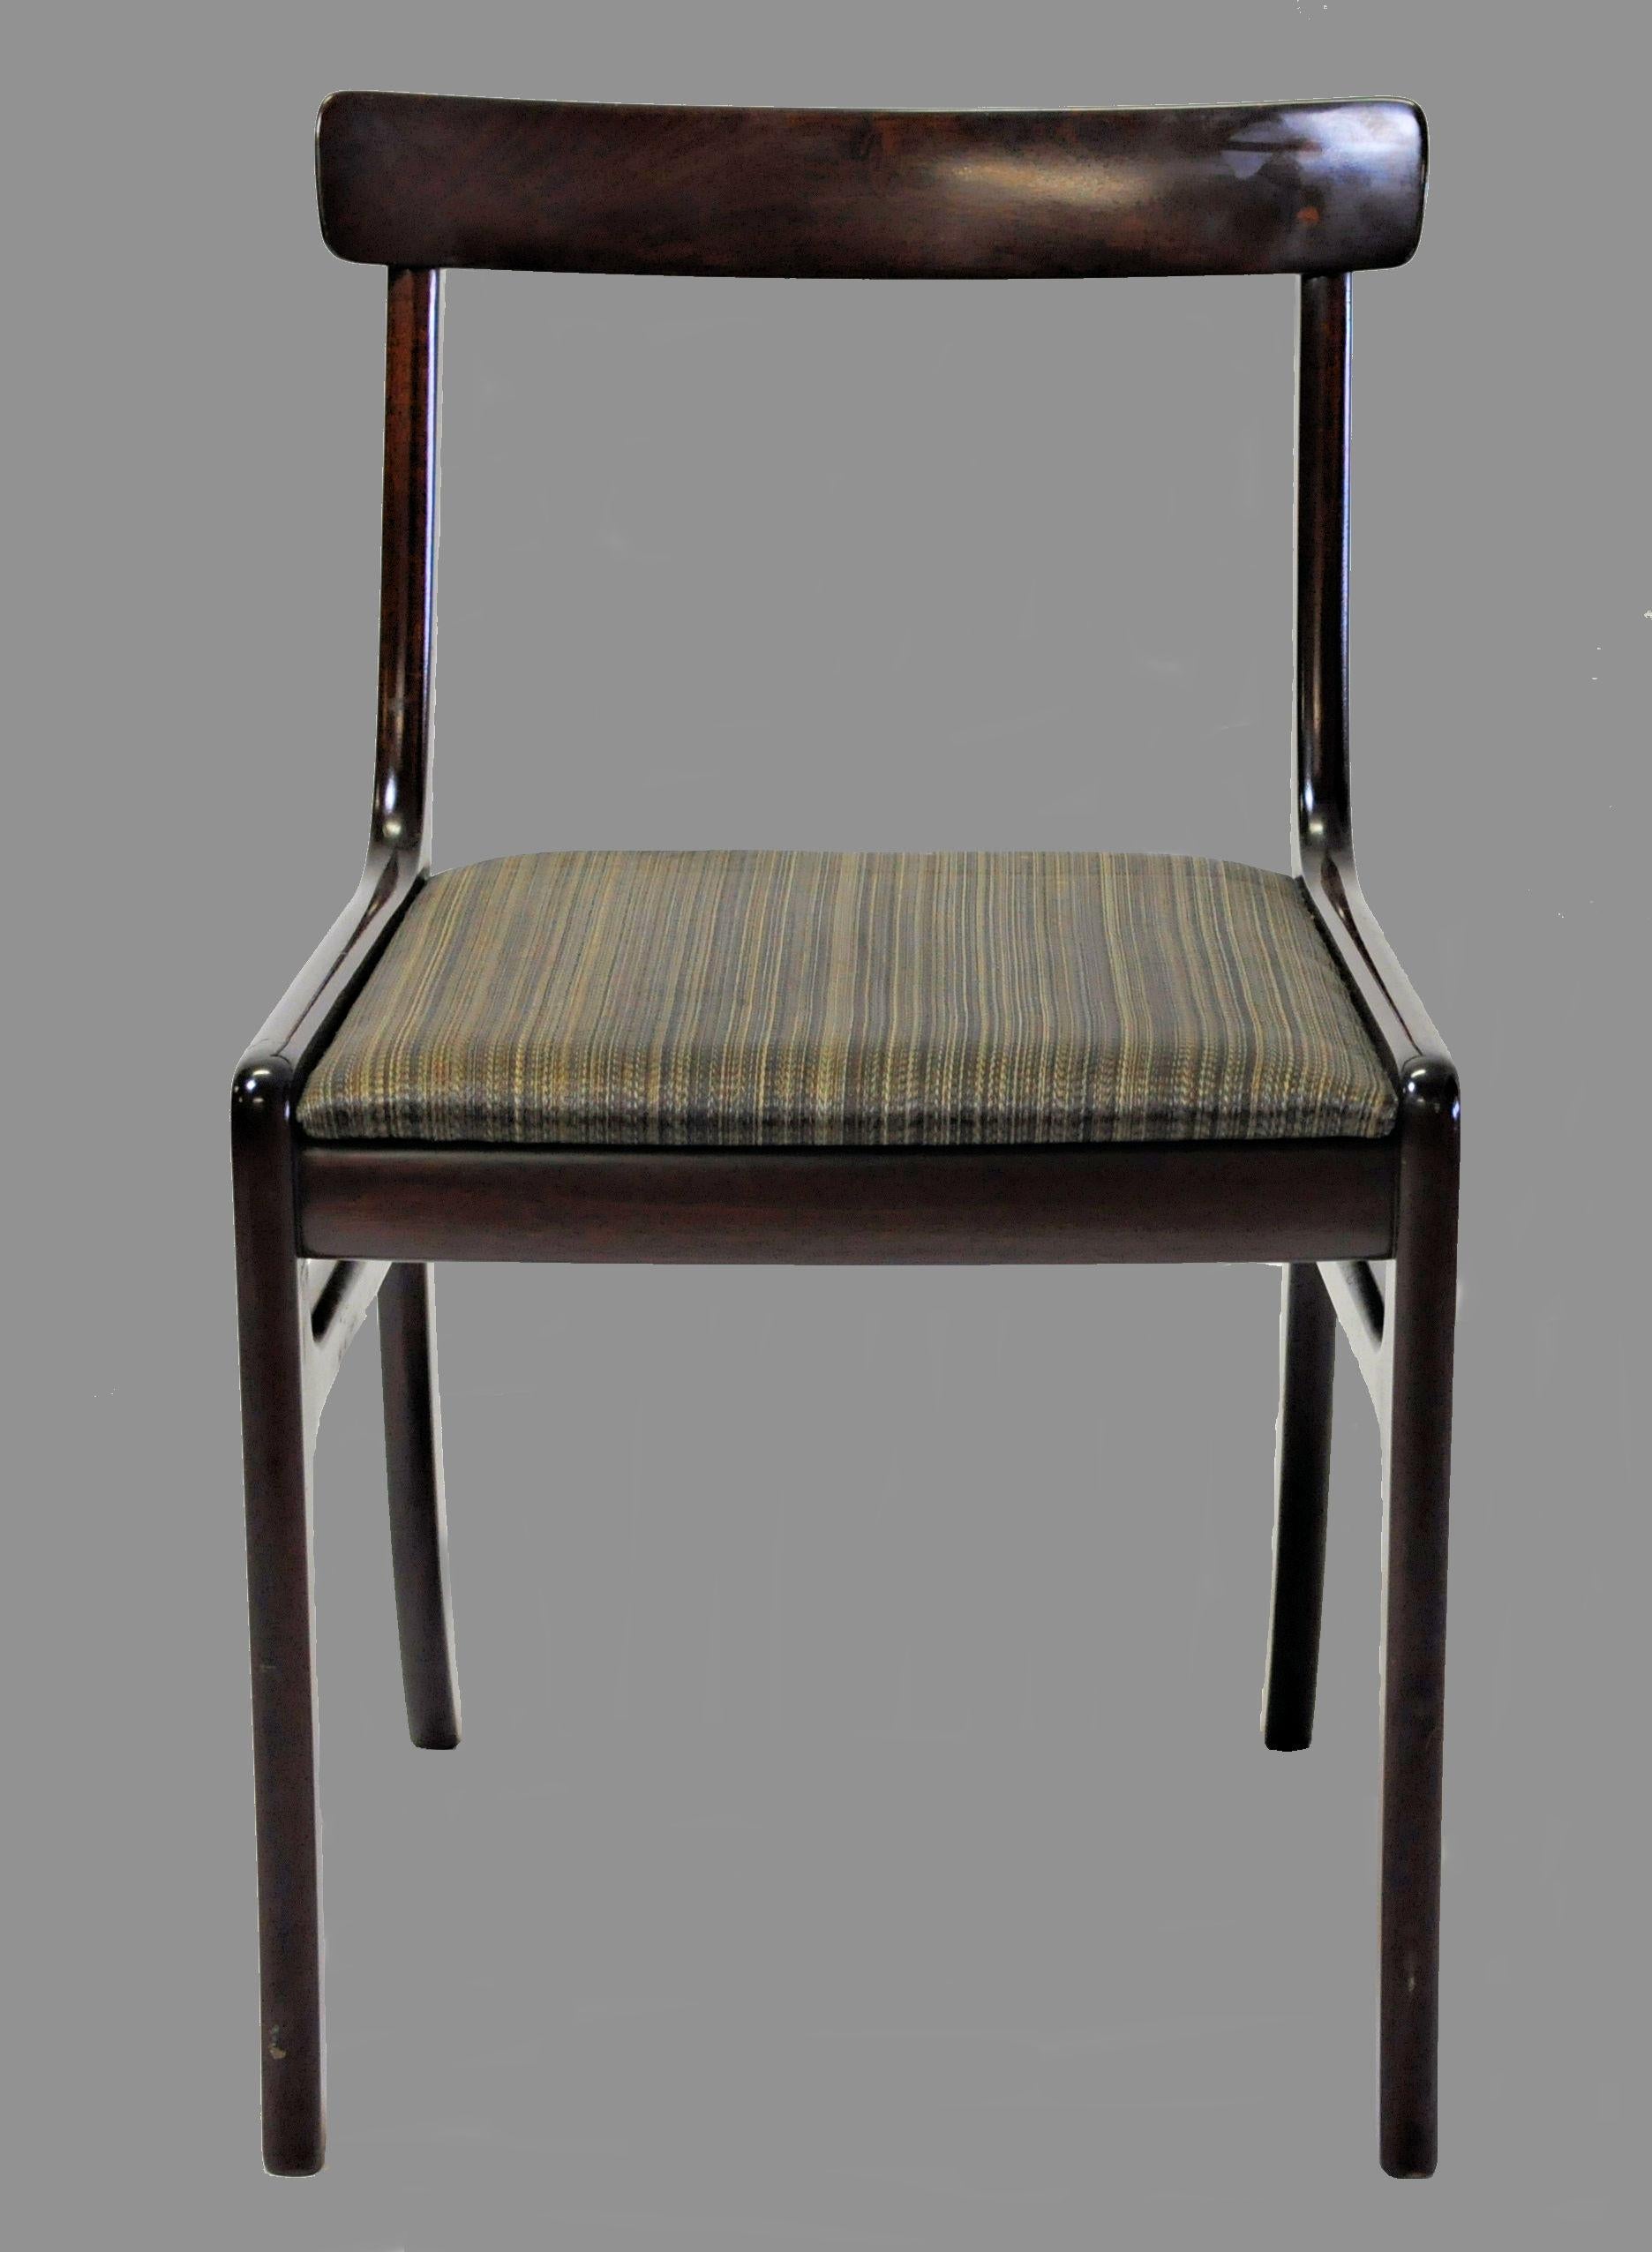 This set of six mahogany Rungstedlund dining chairs designed by Ole Wanscher were produced during the 1960s and 1970s by Poul Jeppesen Furniture. 

The dining chairs are part of the Rungstedlund dining furniture series designed by Ole Wanscher and